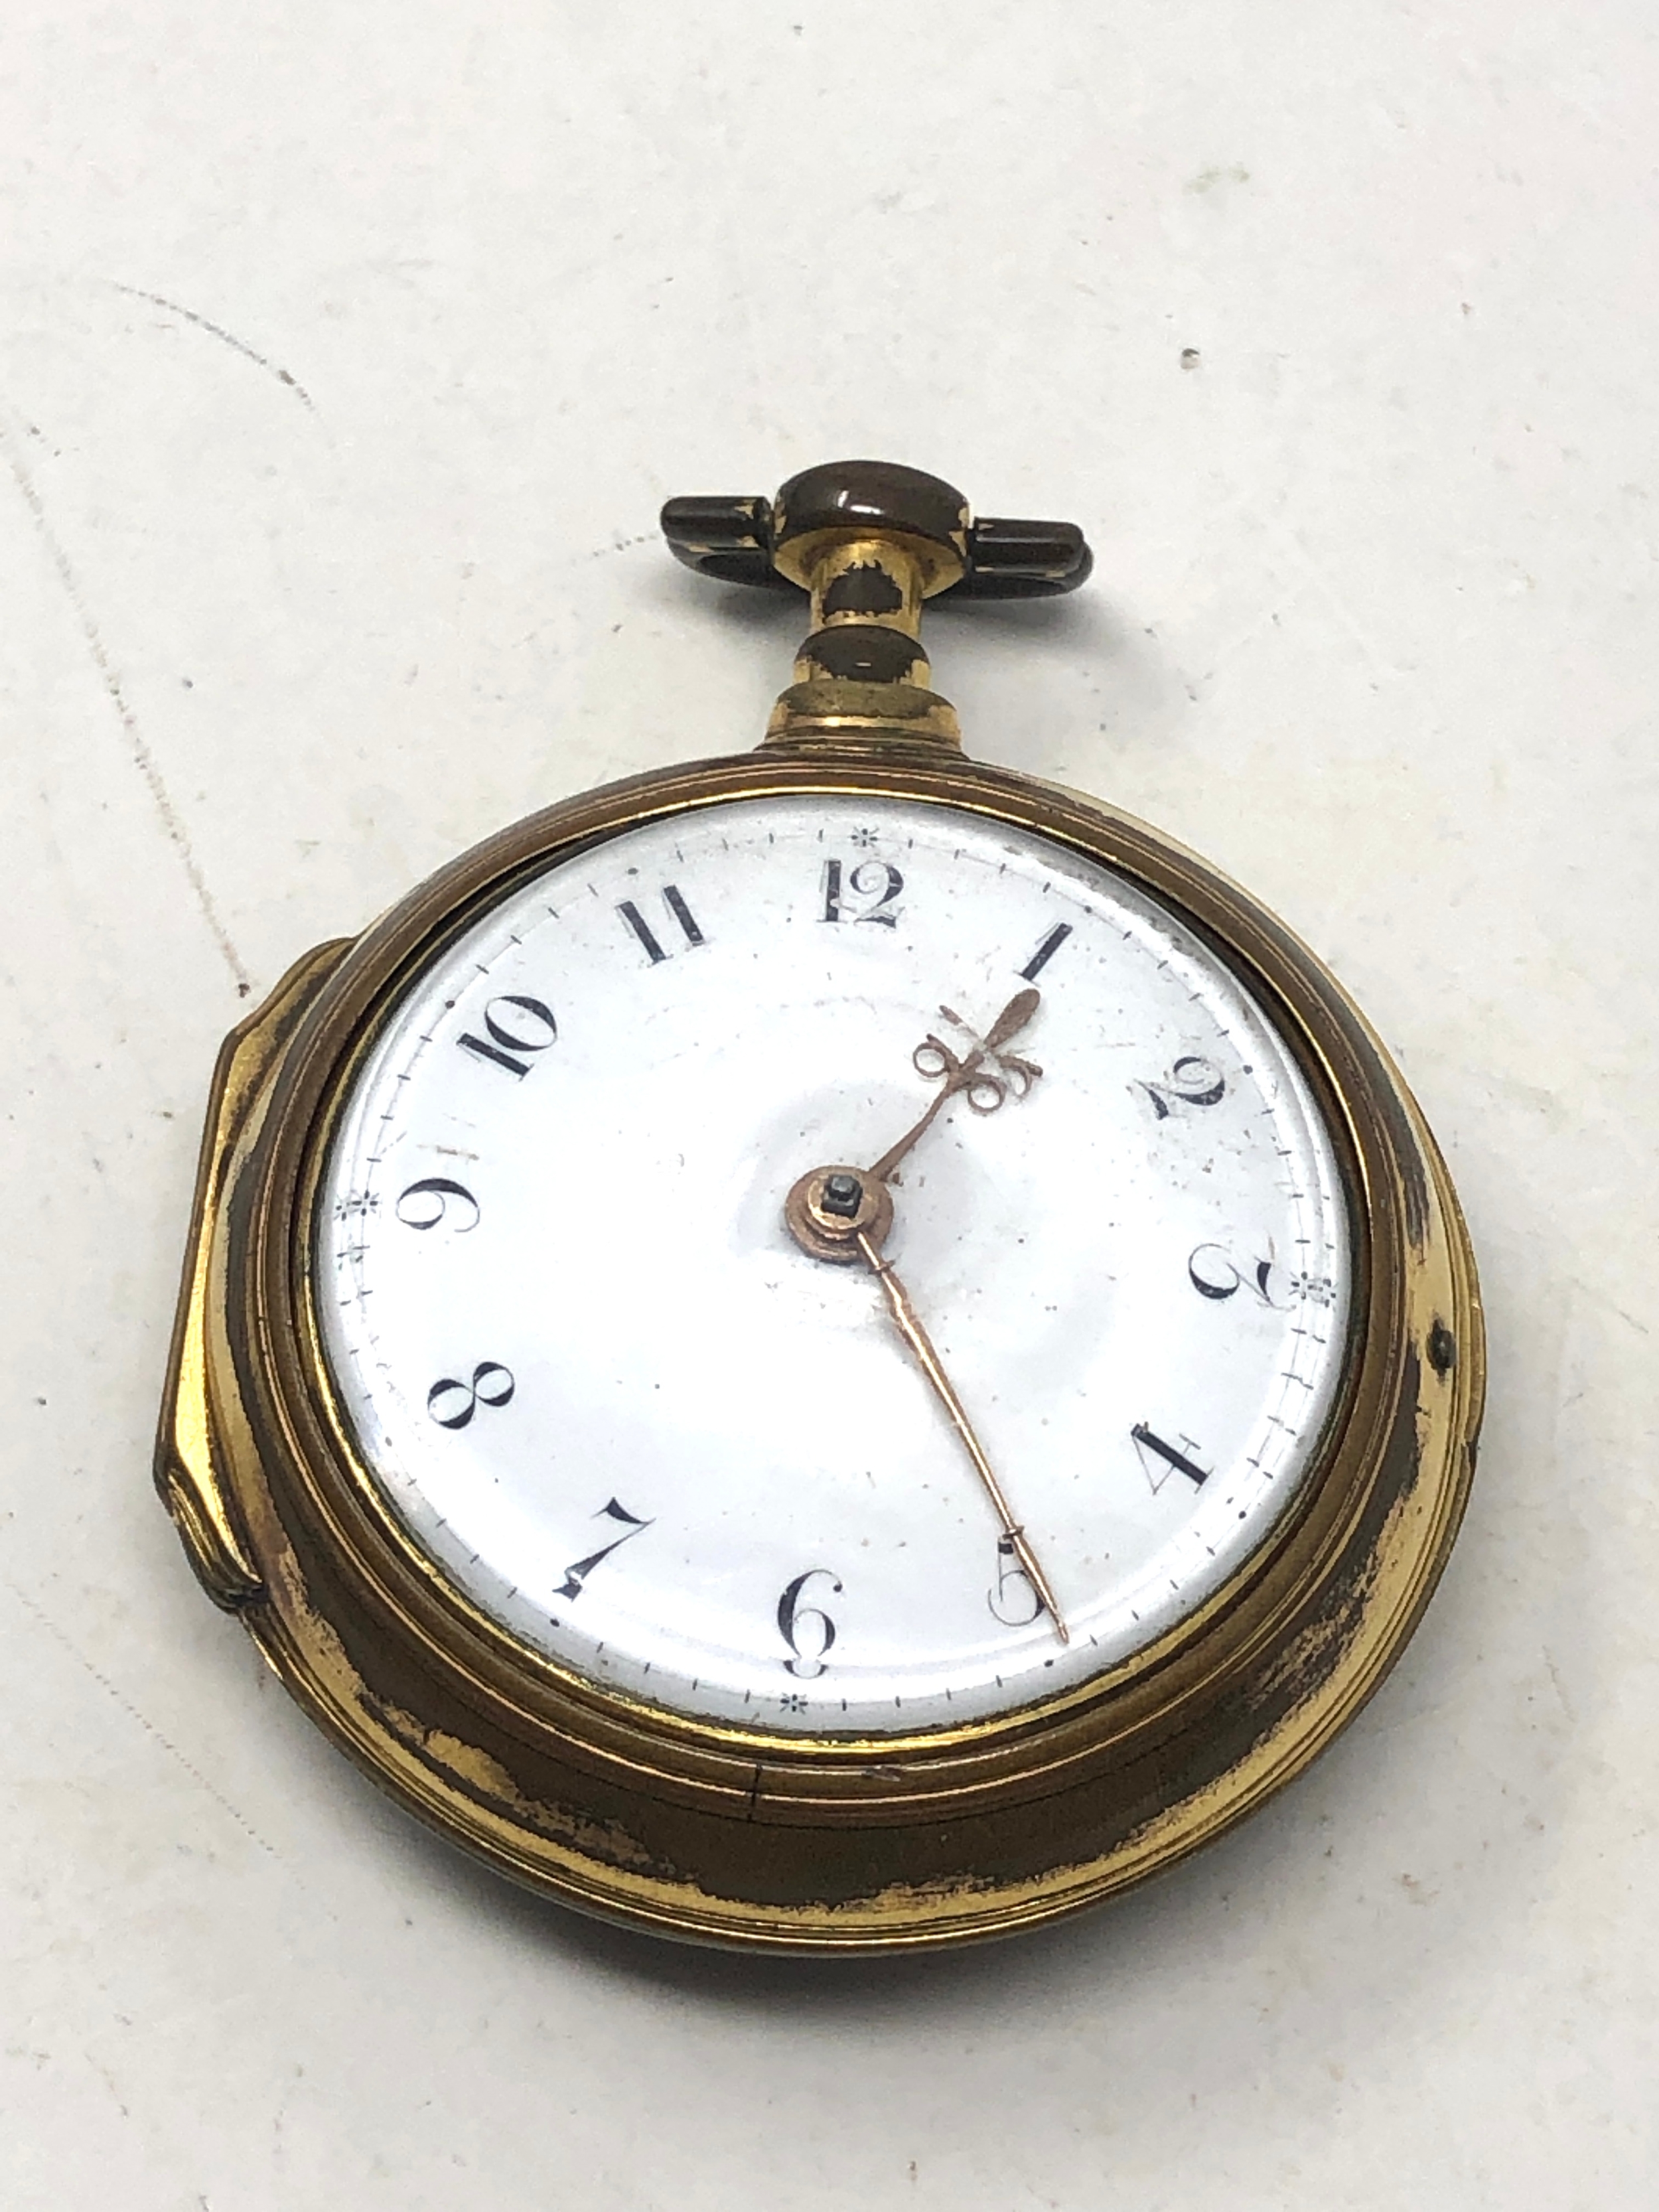 Antique gold plated fusee pair case pocket watch the watch is not ticking spares or repair case worn